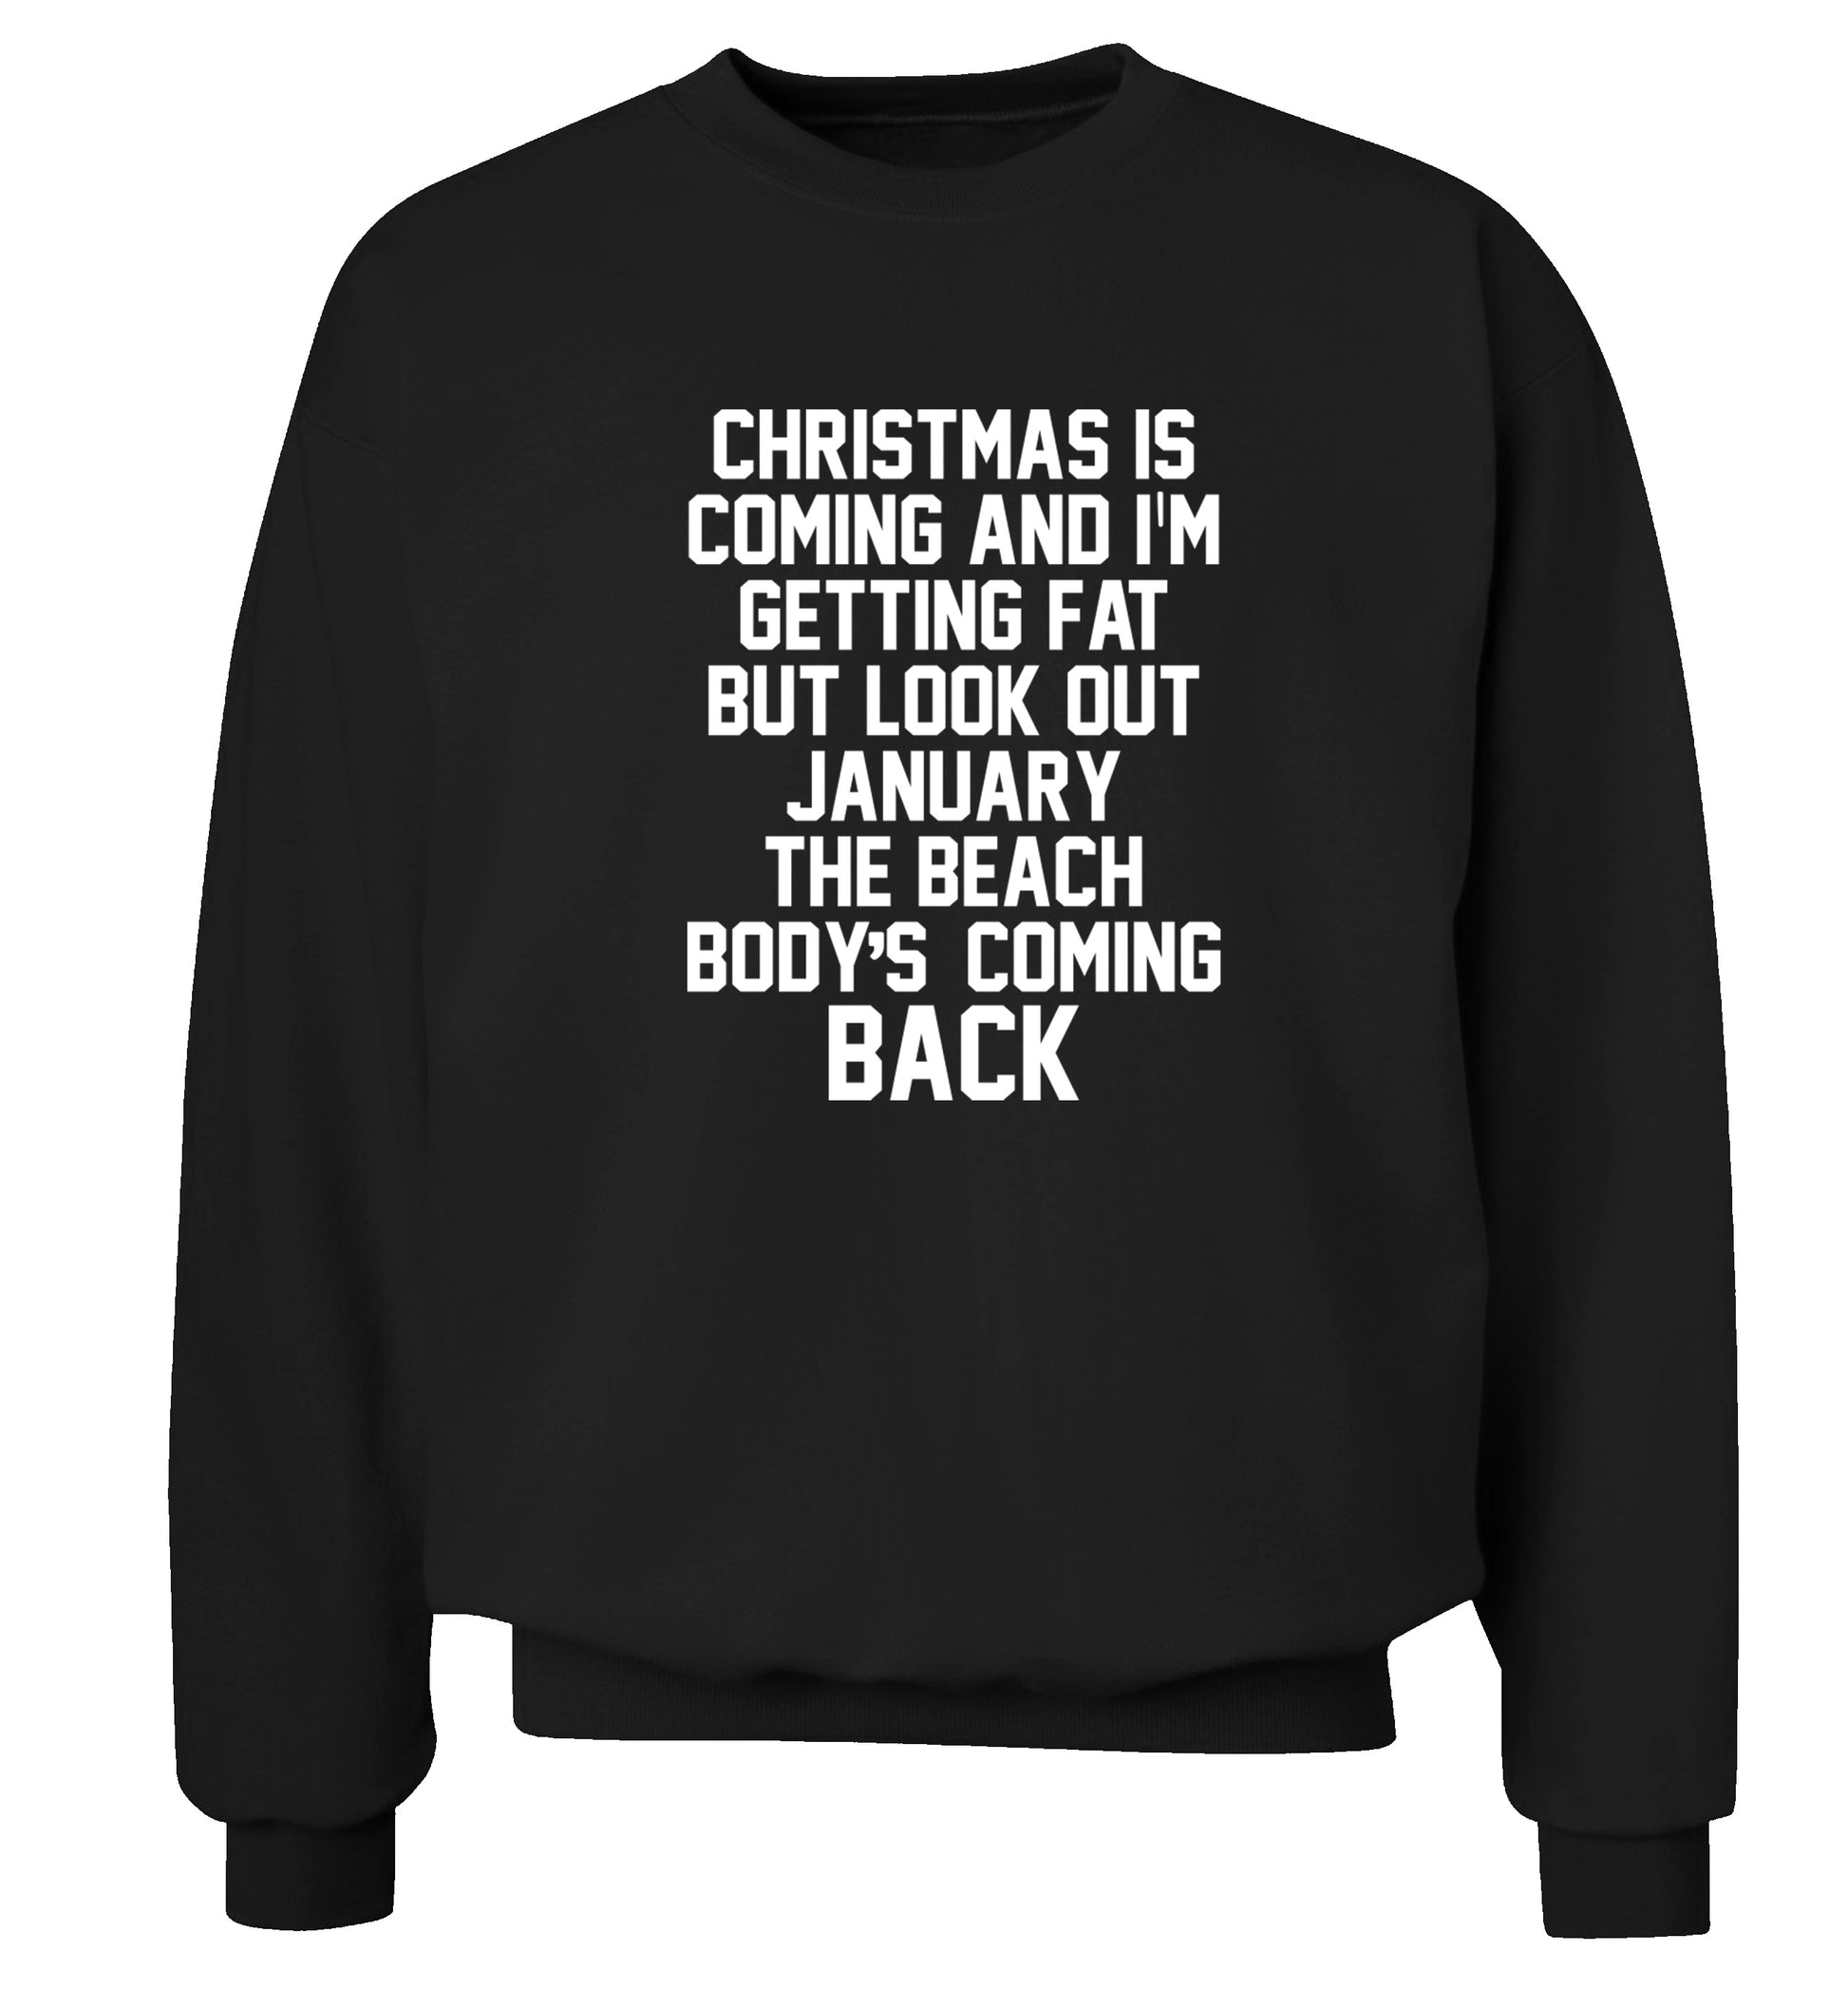 Christmas is coming and I'm getting fat but look out January the beach body's coming back! Adult's unisex black Sweater 2XL